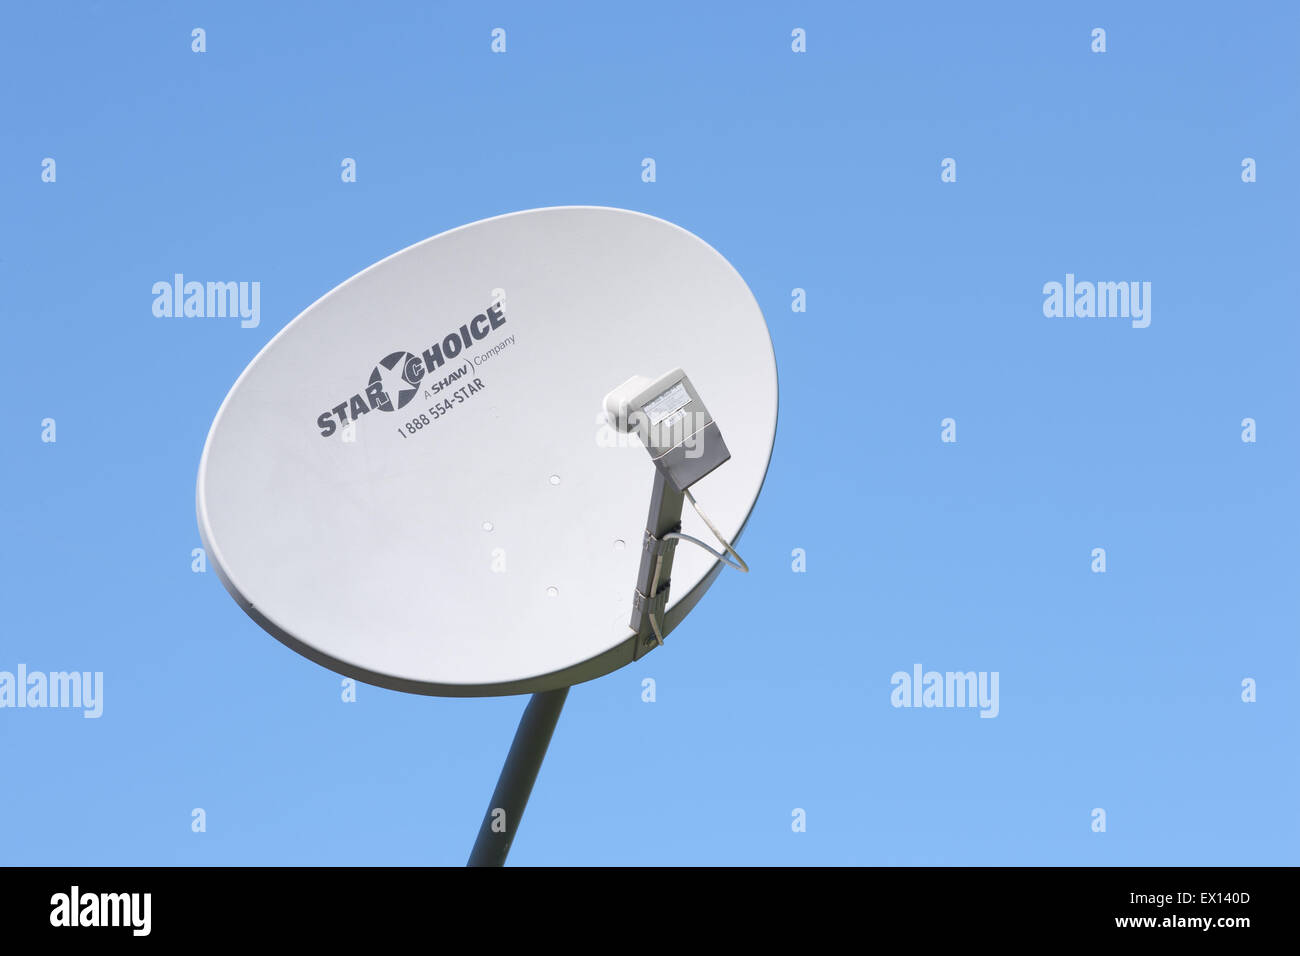 PLEASANT VALLEY, CANADA - JUNE 24, 2015: Shaw Direct satellite dish. Shaw Direct is a Canadian satellite television broadcaster. Stock Photo